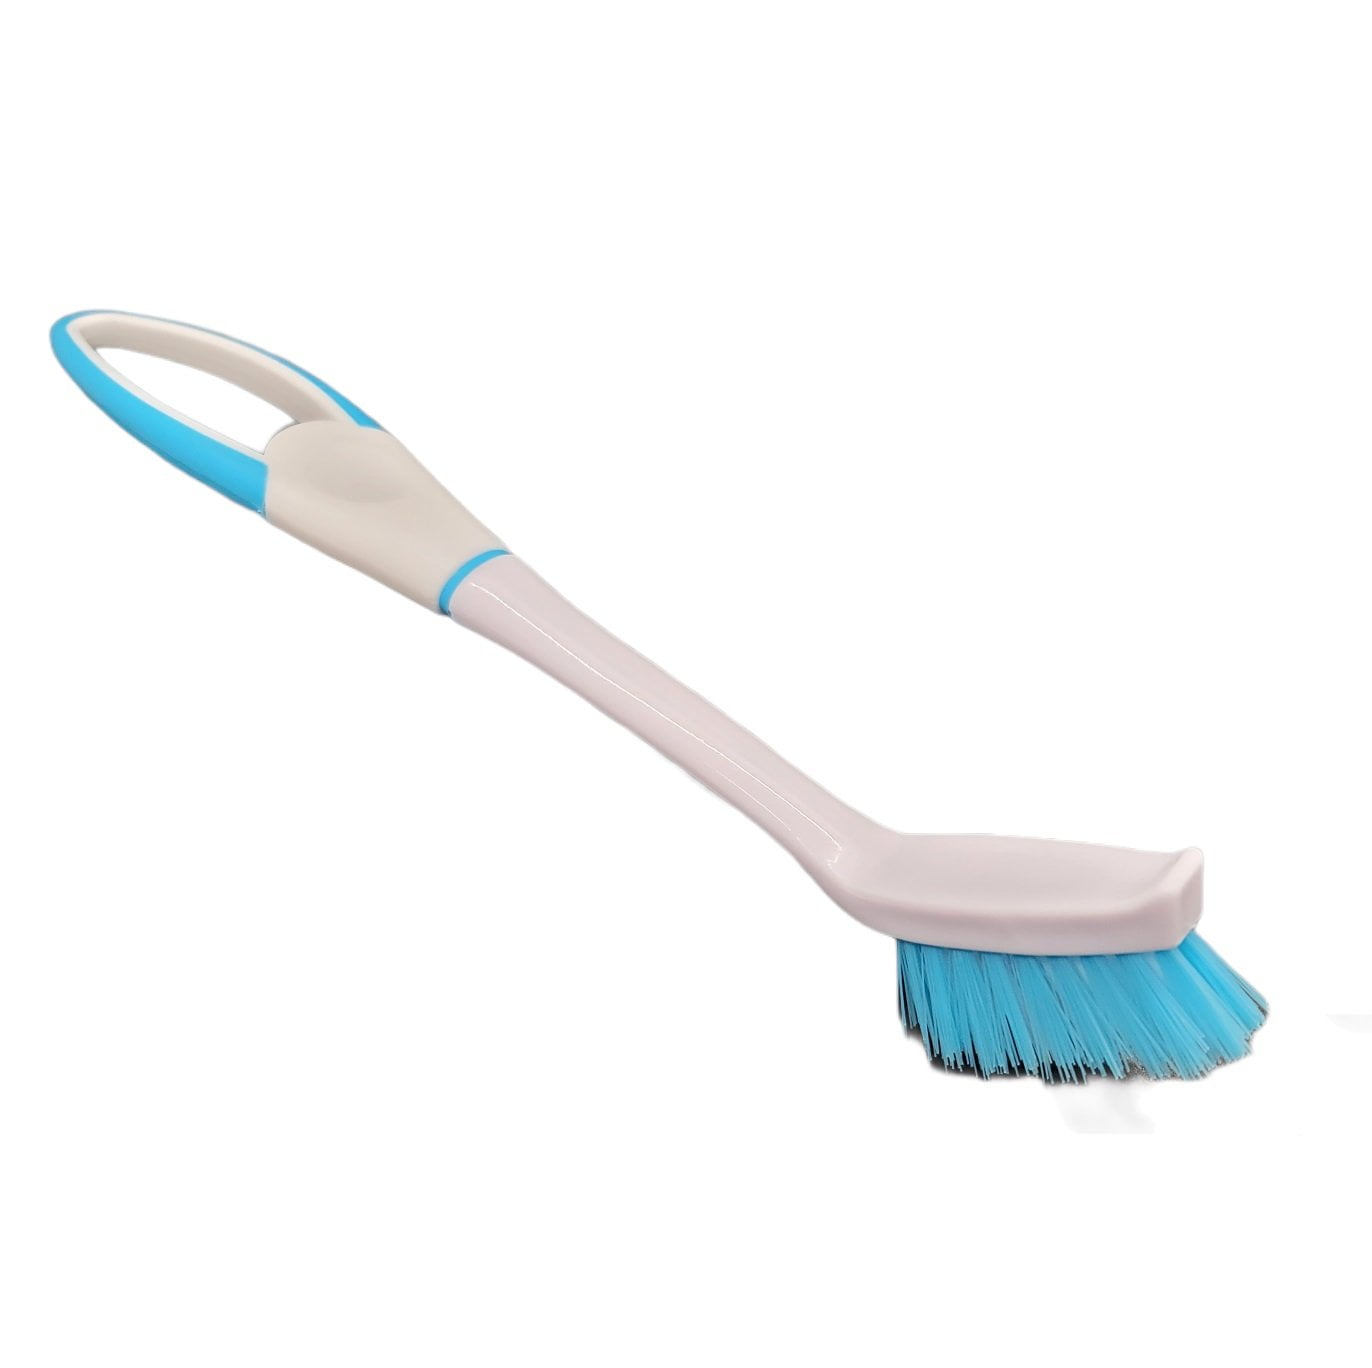 Long Gap Brush Dead Angle Kitchen Window Groove Dust Brush Joints Narrow  Brush Tile Cleaning Crevices Cleaning Stiff Scrubber Bristles Cleaner  Multi-function U6I7